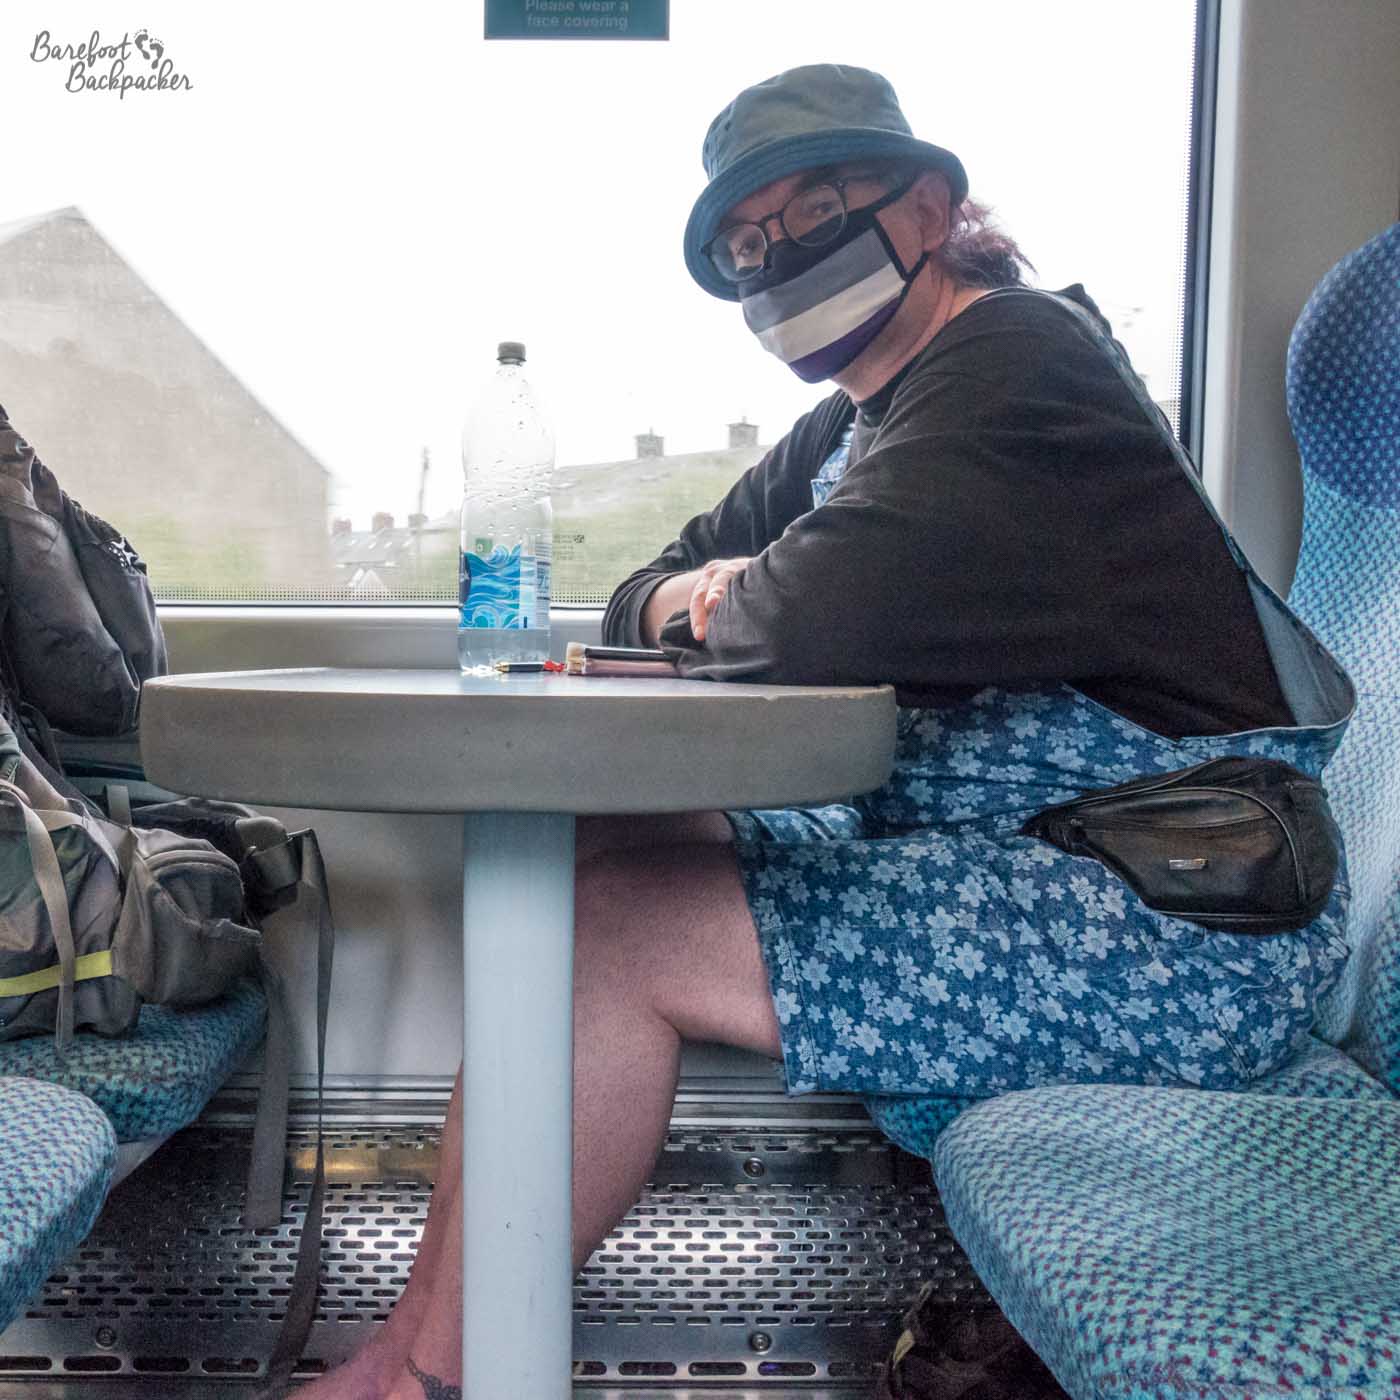 Sat on a train, at a table, with a backpack on the opposite seat, I'm in front of a large carriage window looking at the camera. Hat, asexual pride mask, long-sleeved t-shirt, dungaree shorts, and bare feet.